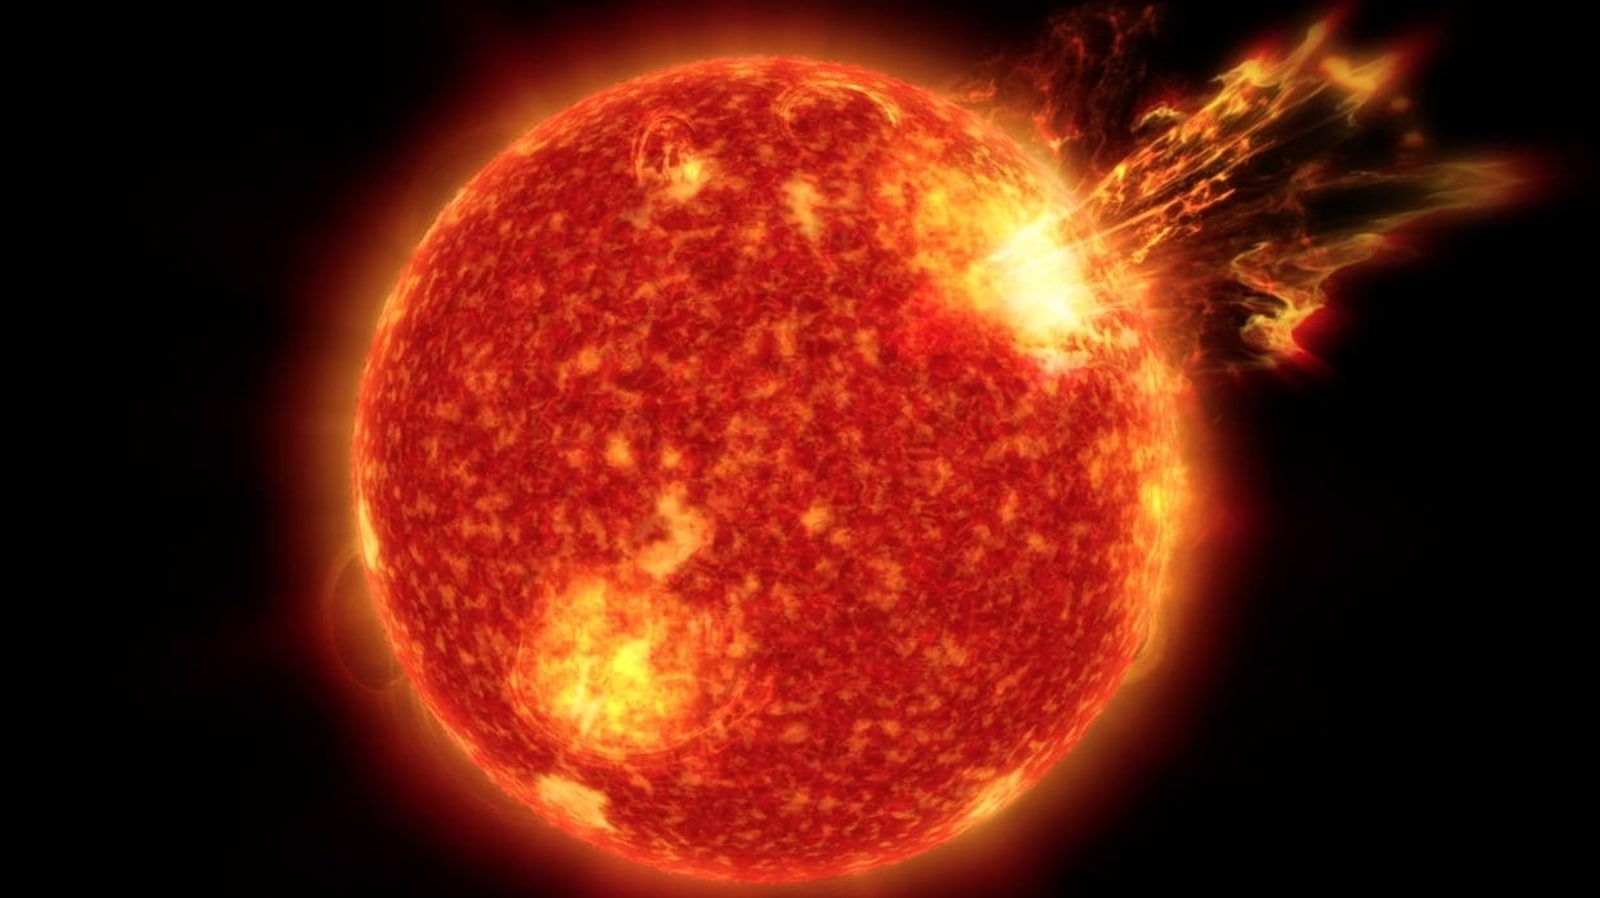 huge-solar-flare-just-hit-earth-today-causes-blackout-in-australia-nz